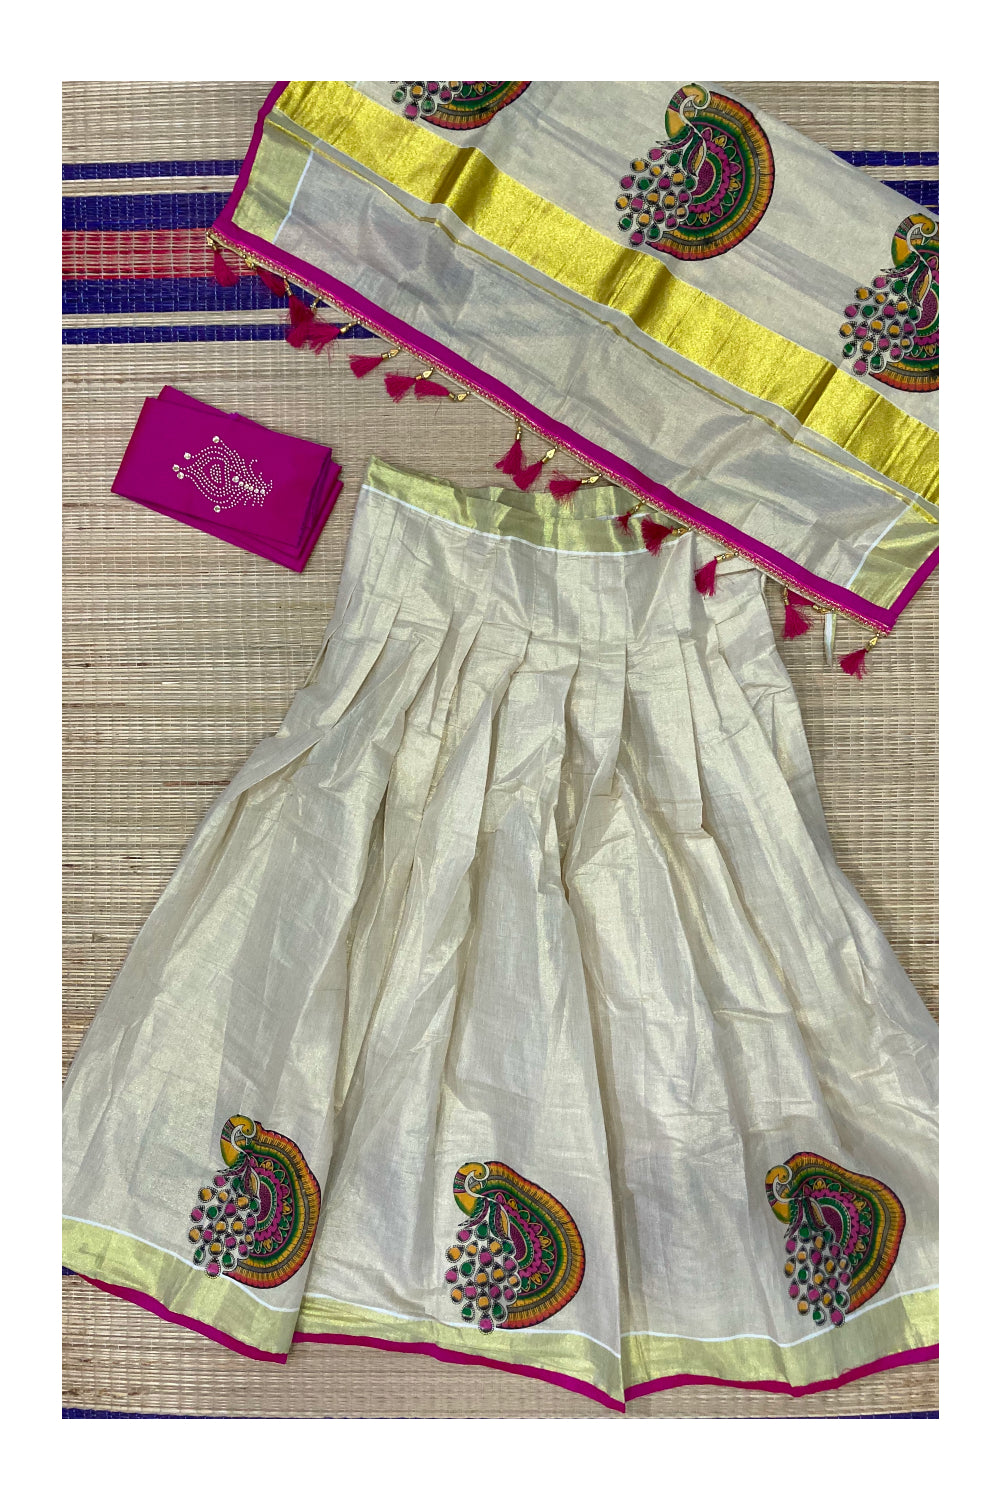 Kerala Tissue Semi Stitched Dhavani Set with Blouse Piece and Neriyathu with Magenta Border and Mural Works